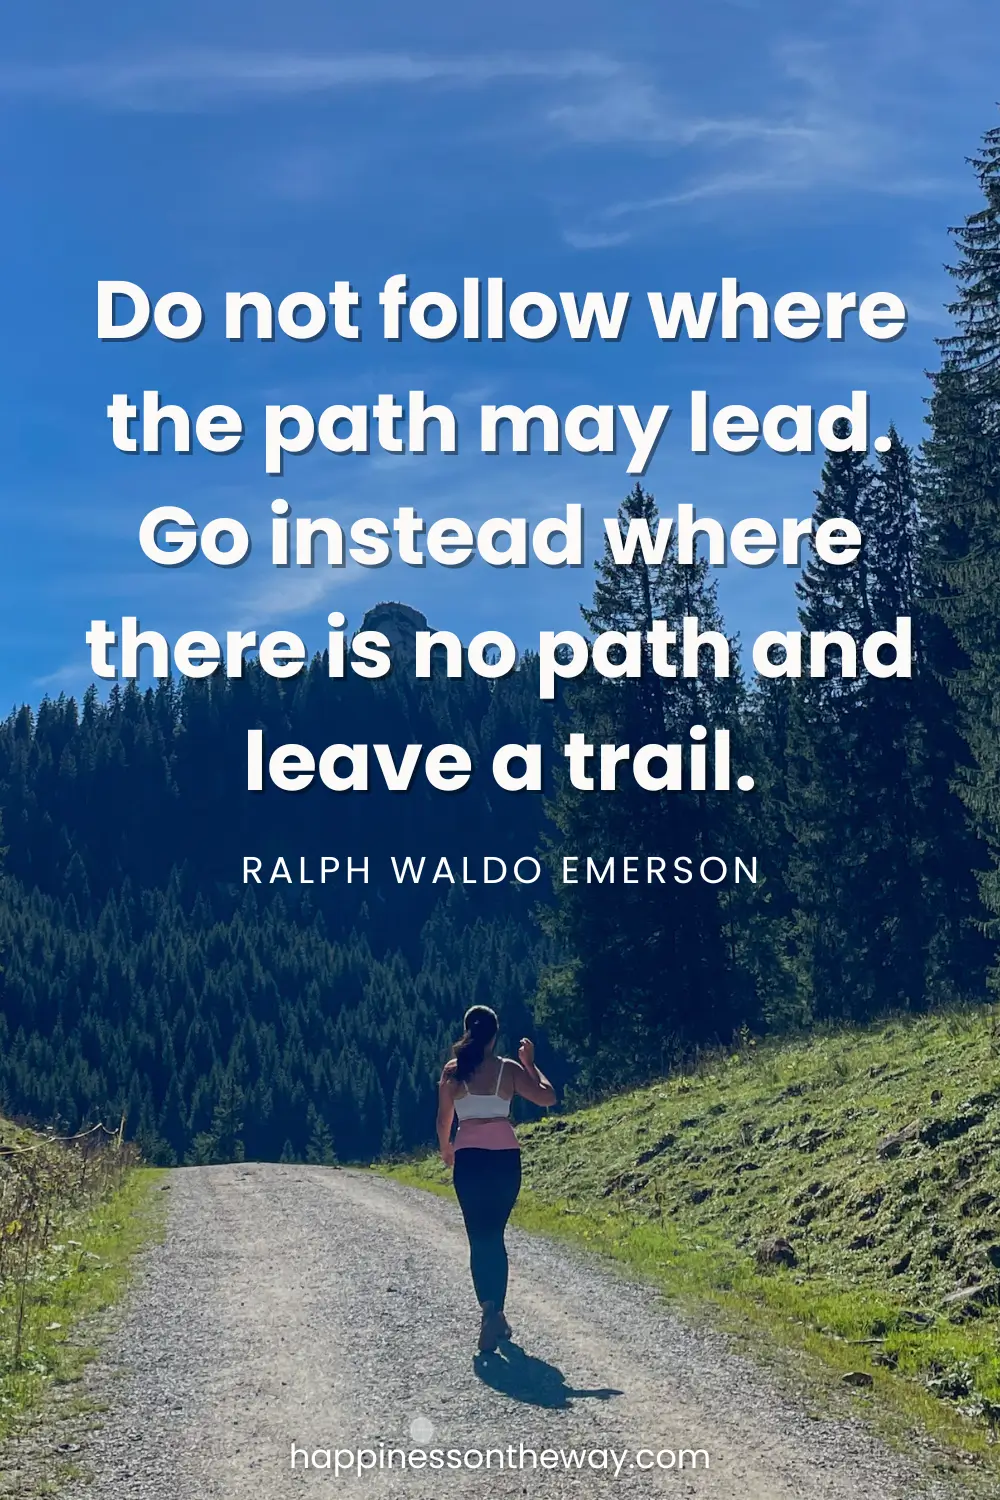 Me walking on a dirt road through a forested mountainous area with the Ralph Waldo Emerson quote 'Do not follow where the path may lead. Go instead where there is no path and leave a trail.'